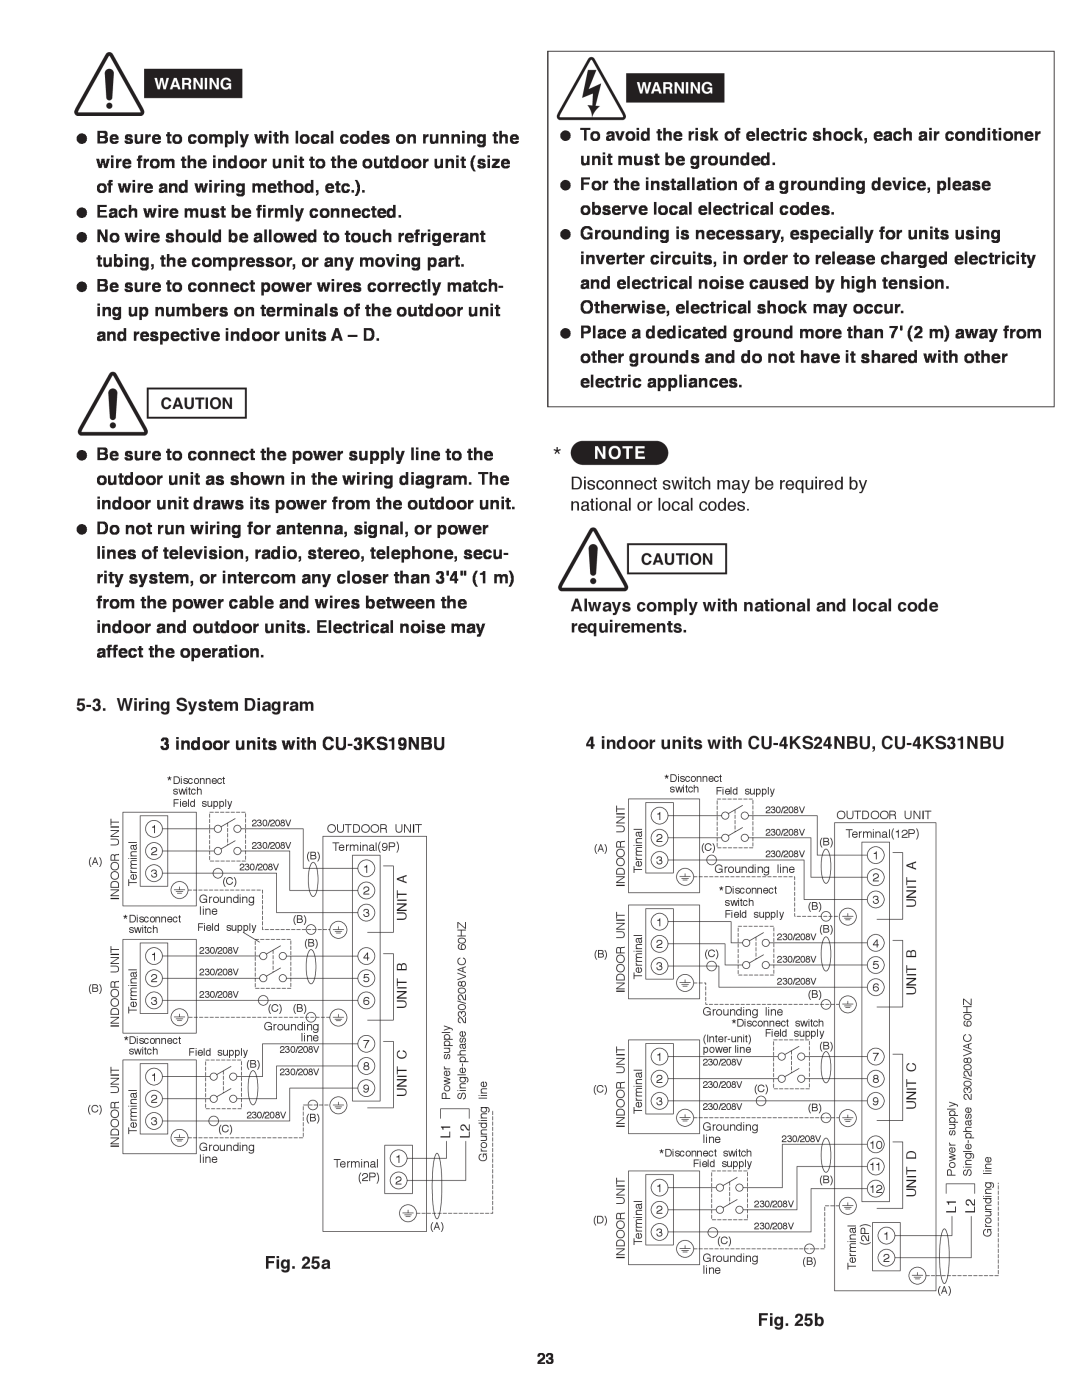 Panasonic CU-4KS31NBU service manual Each wire must be firmly connected 